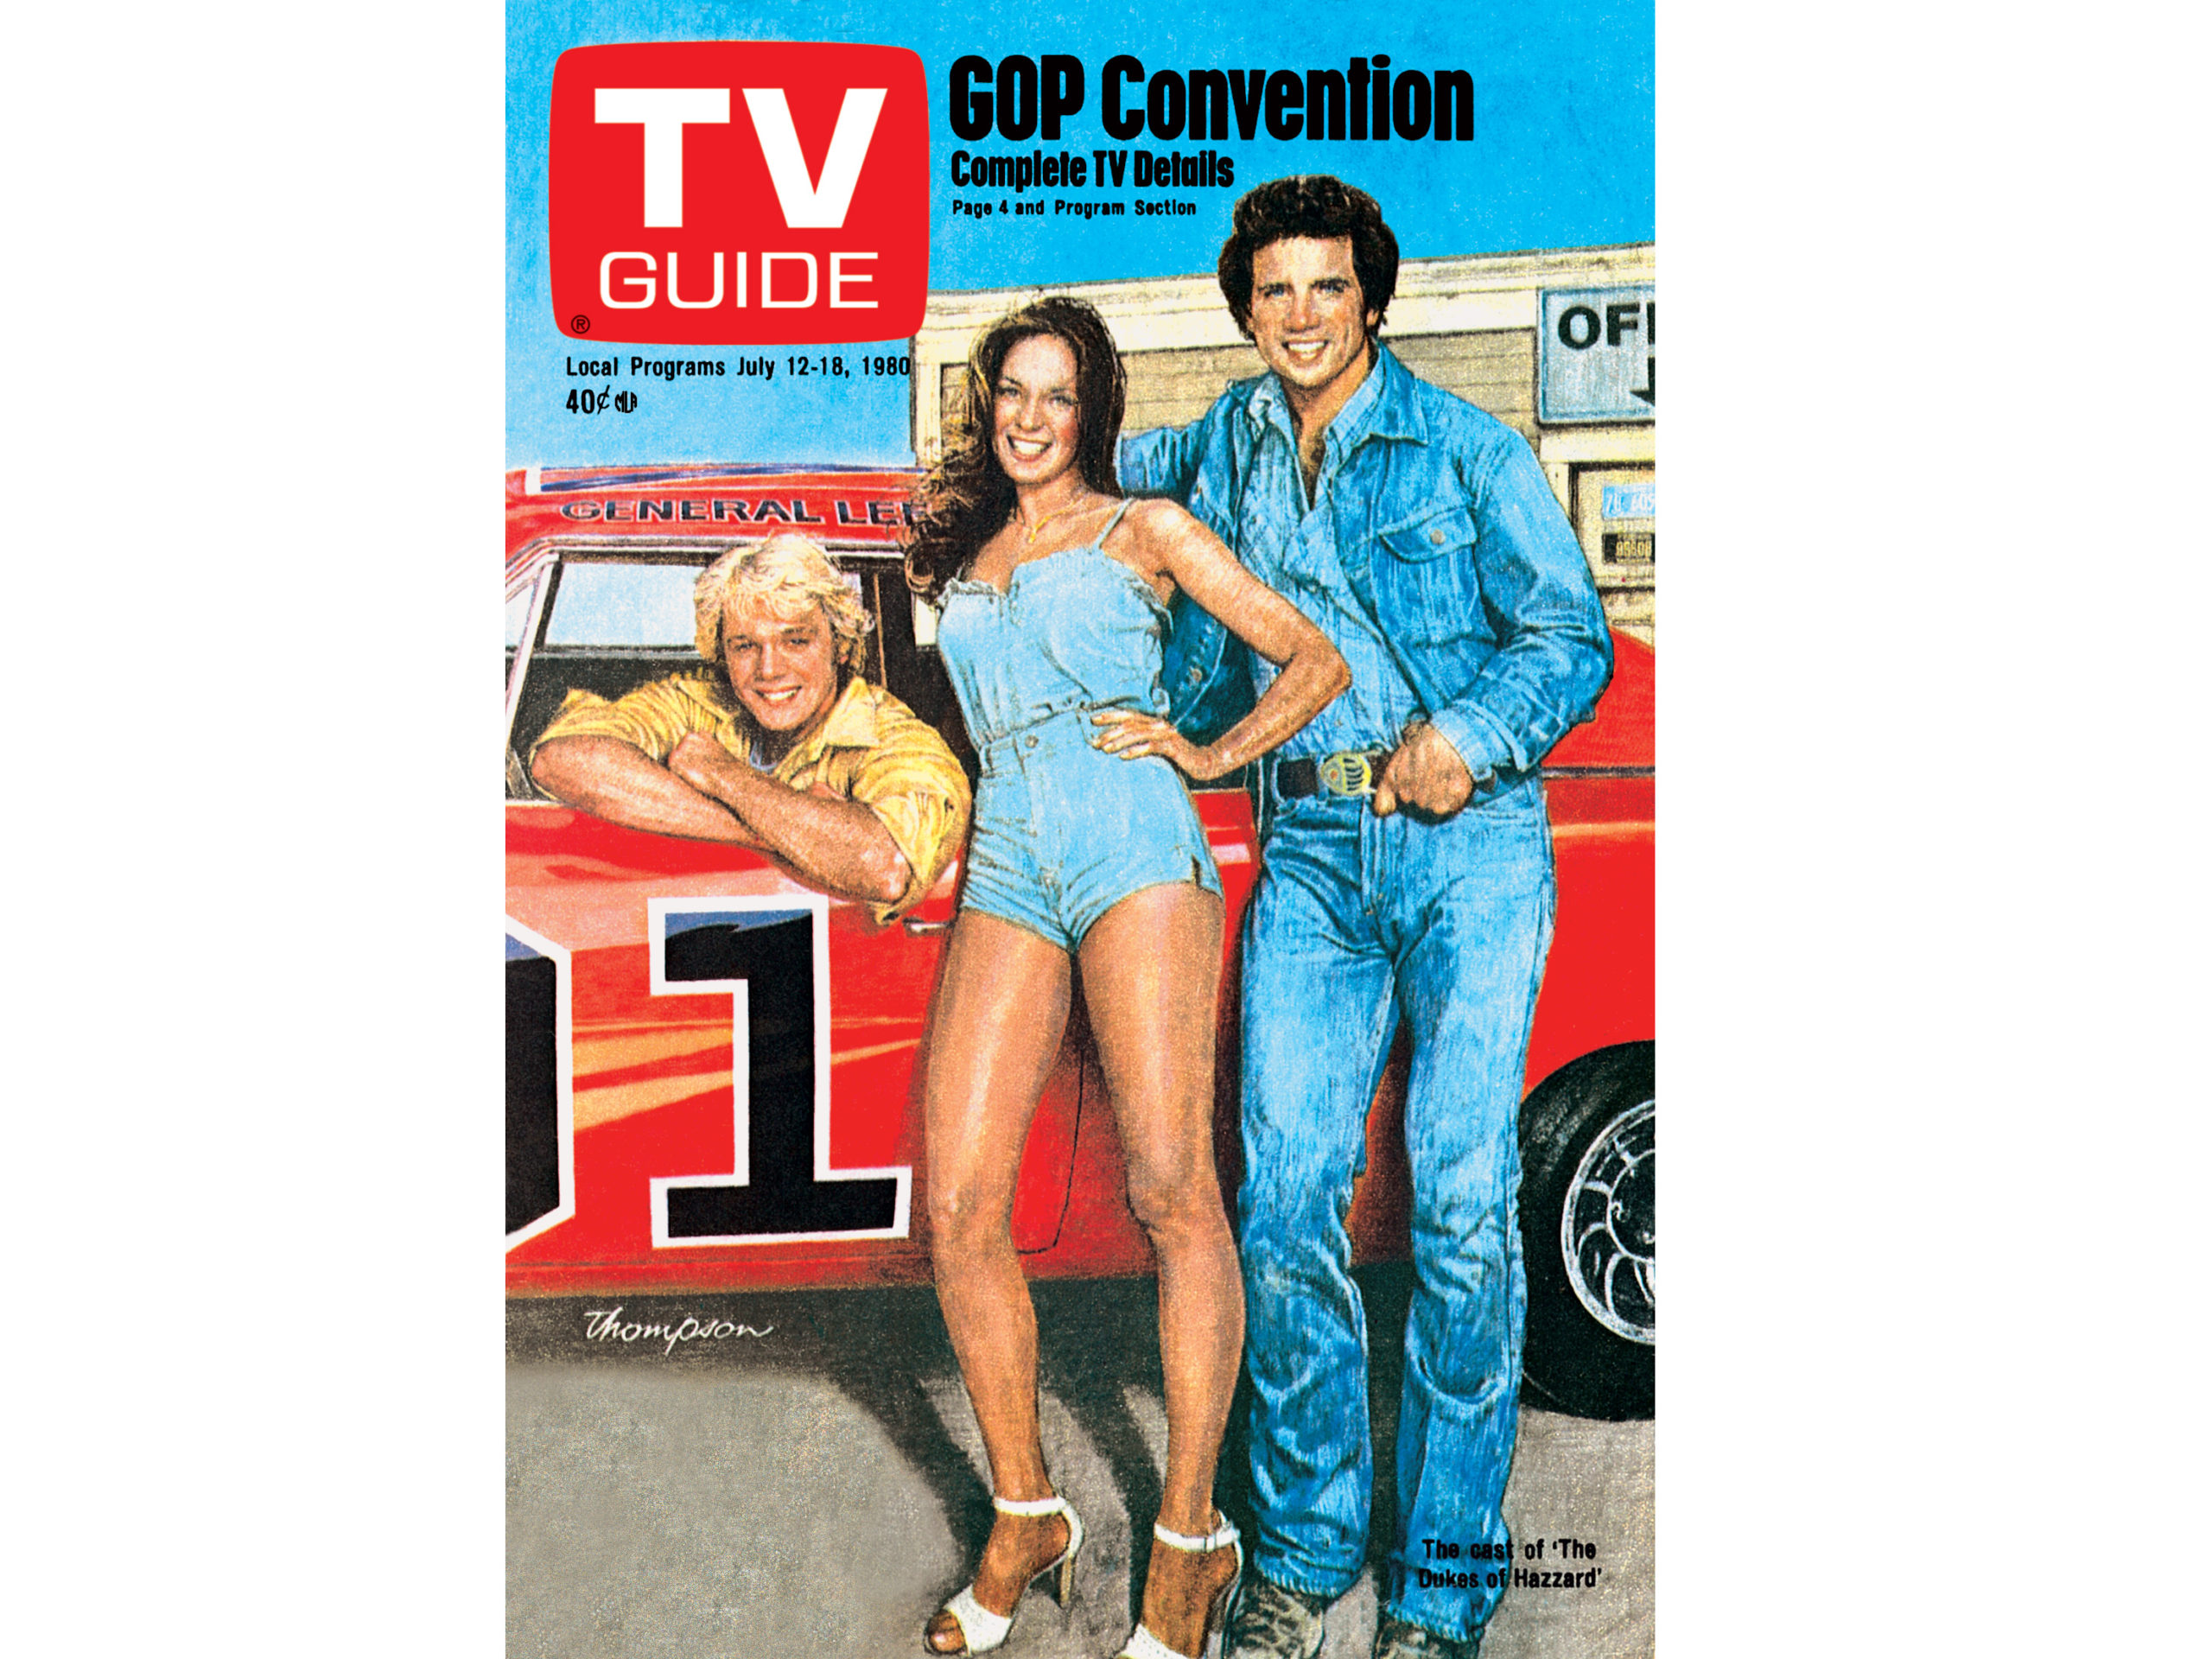 The Dukes of Hazzard on the cover of TV Guide - July 12, 1980